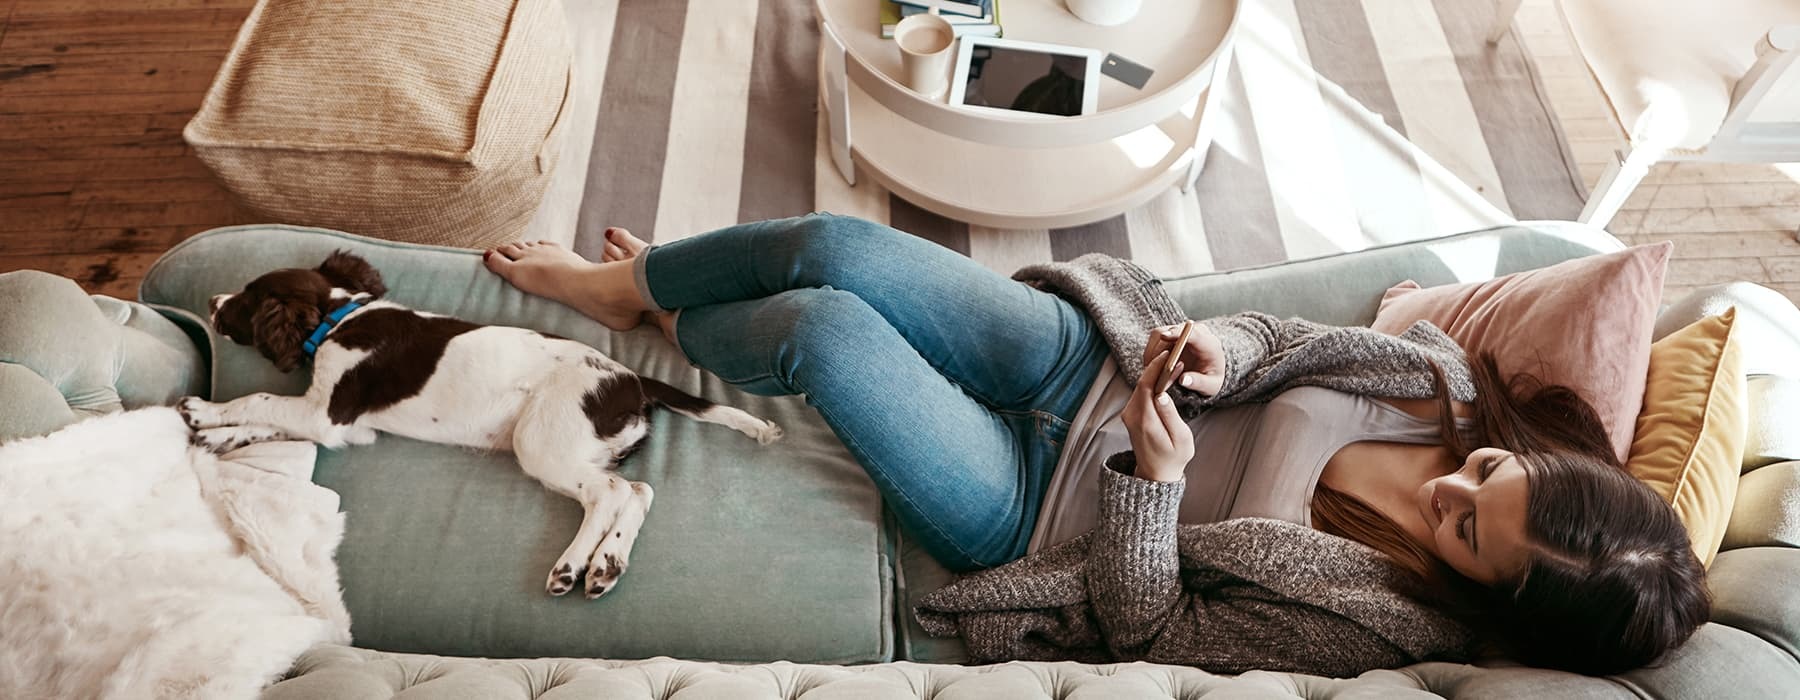 lifestyle image of a woman laying on a couch beside her pet